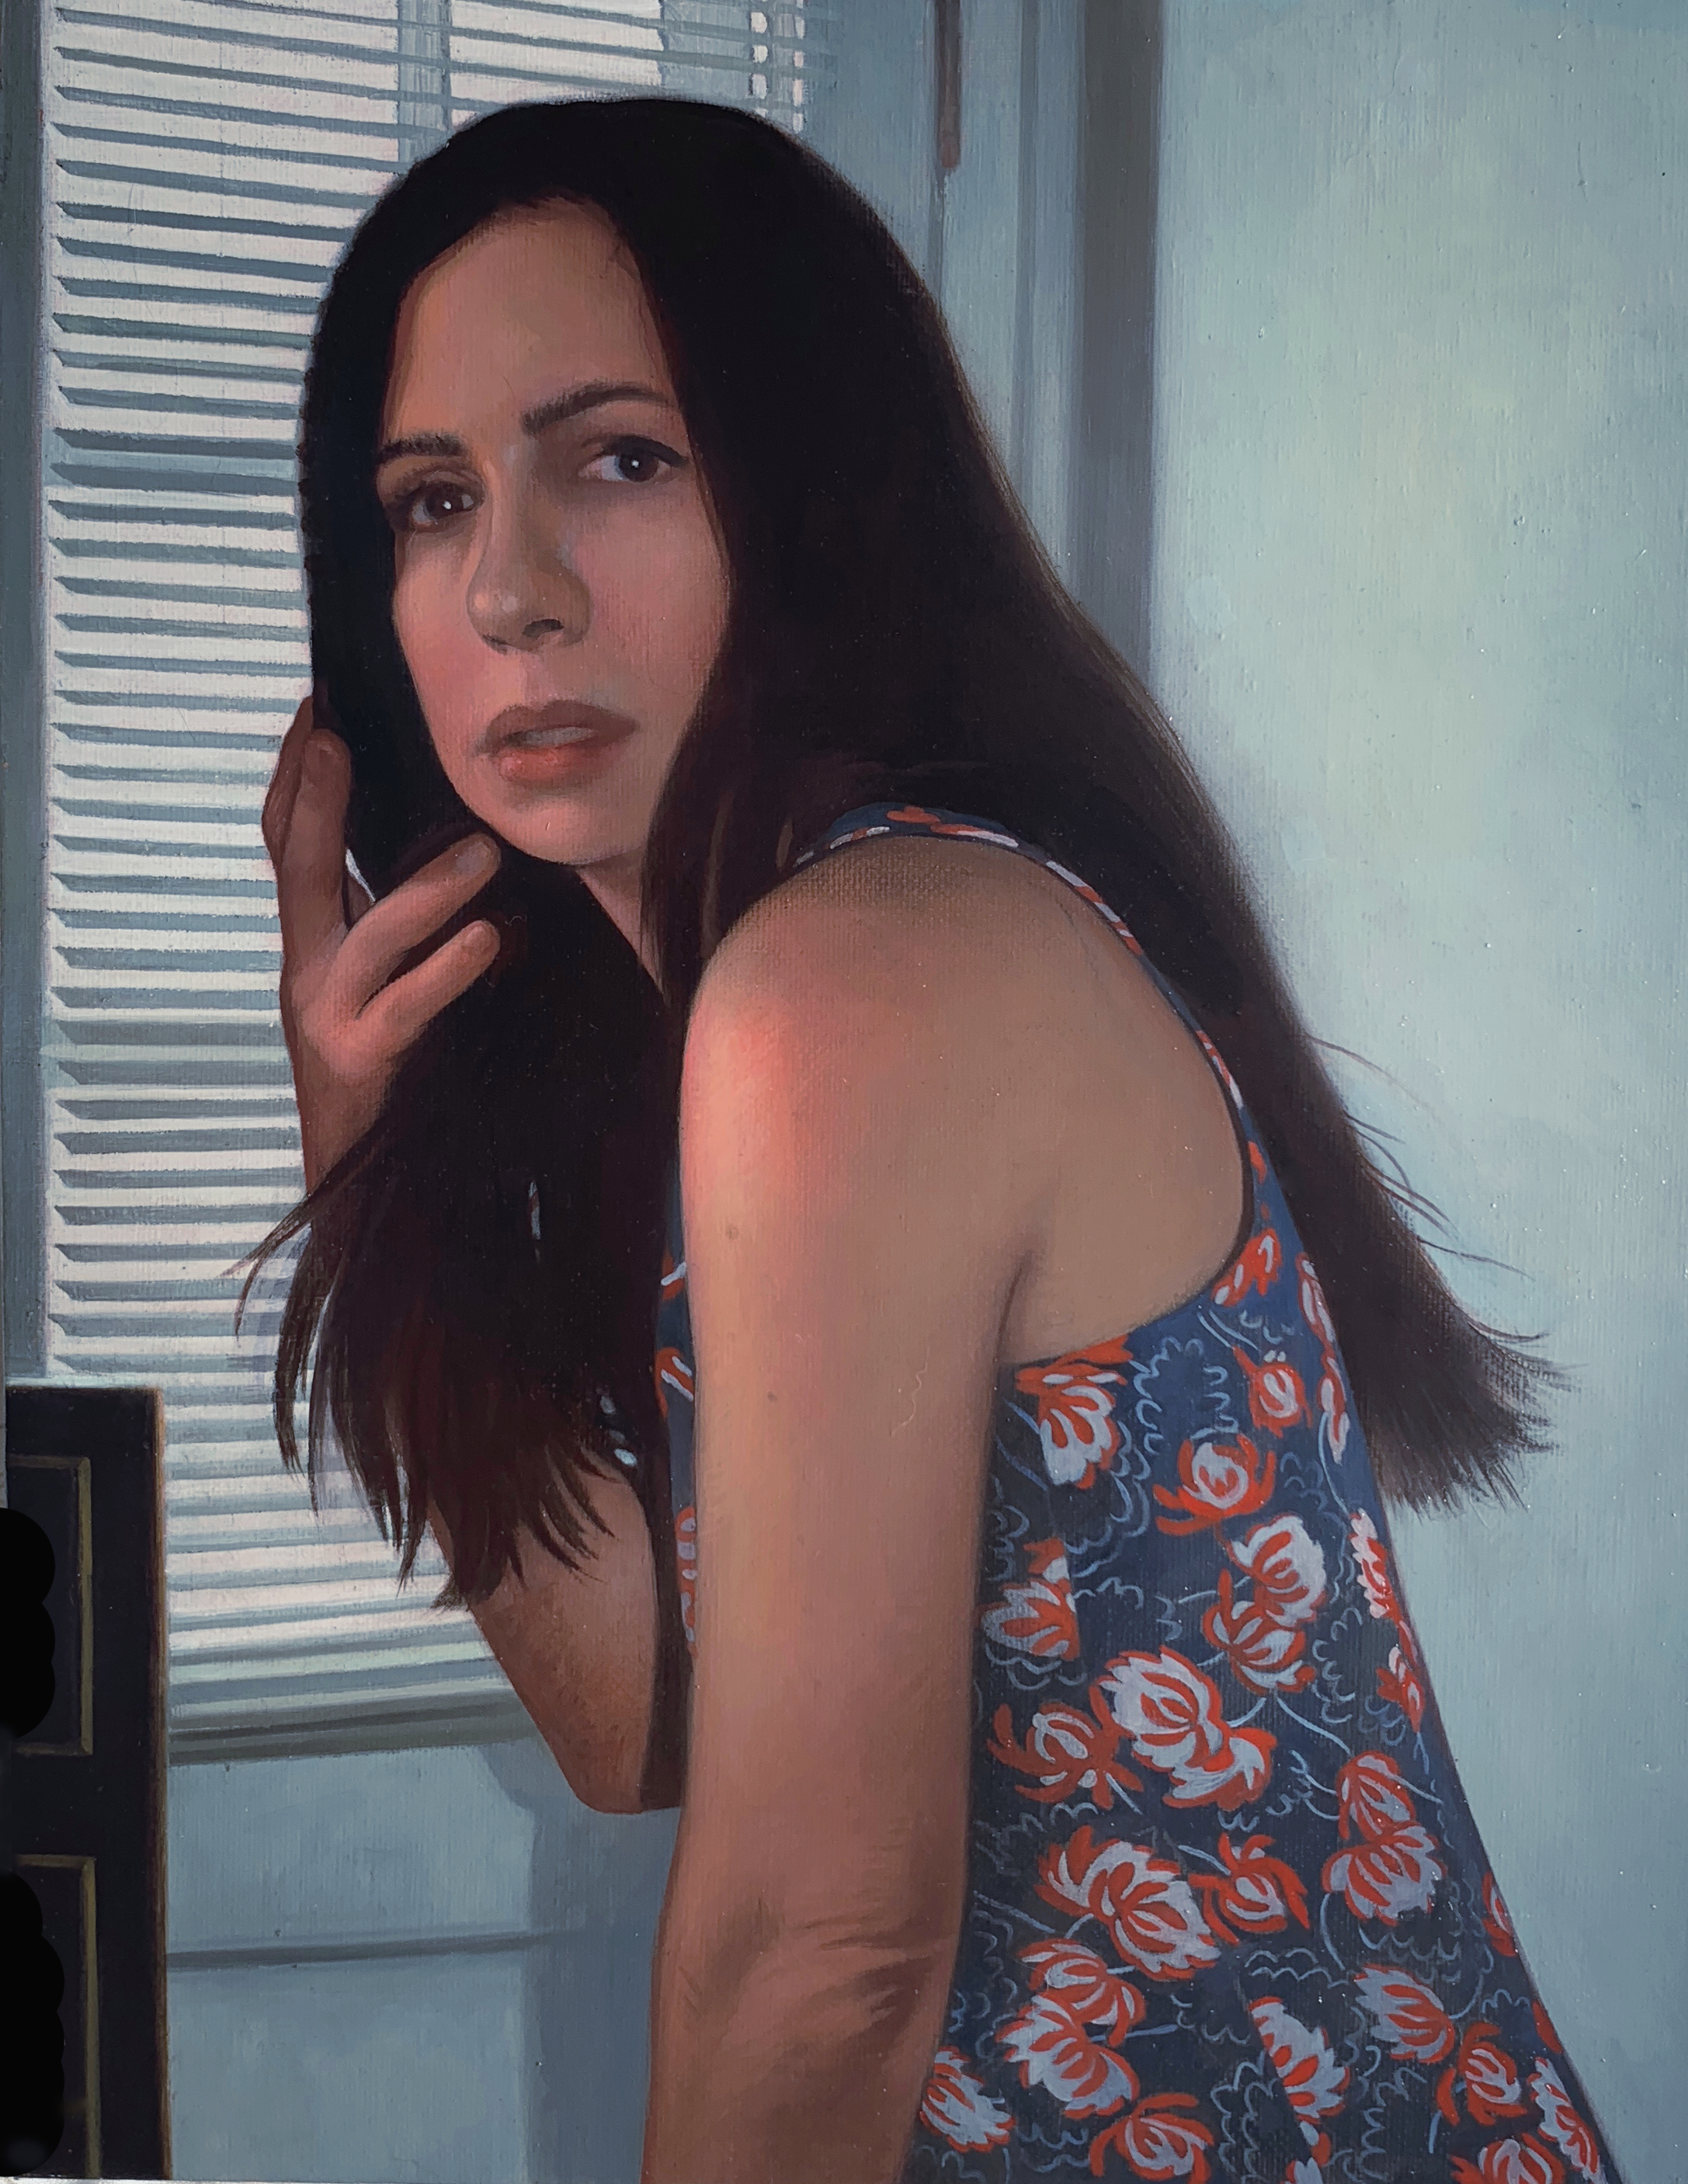   The Startling , 2019, Oil on linen, 14 x 11 inches 